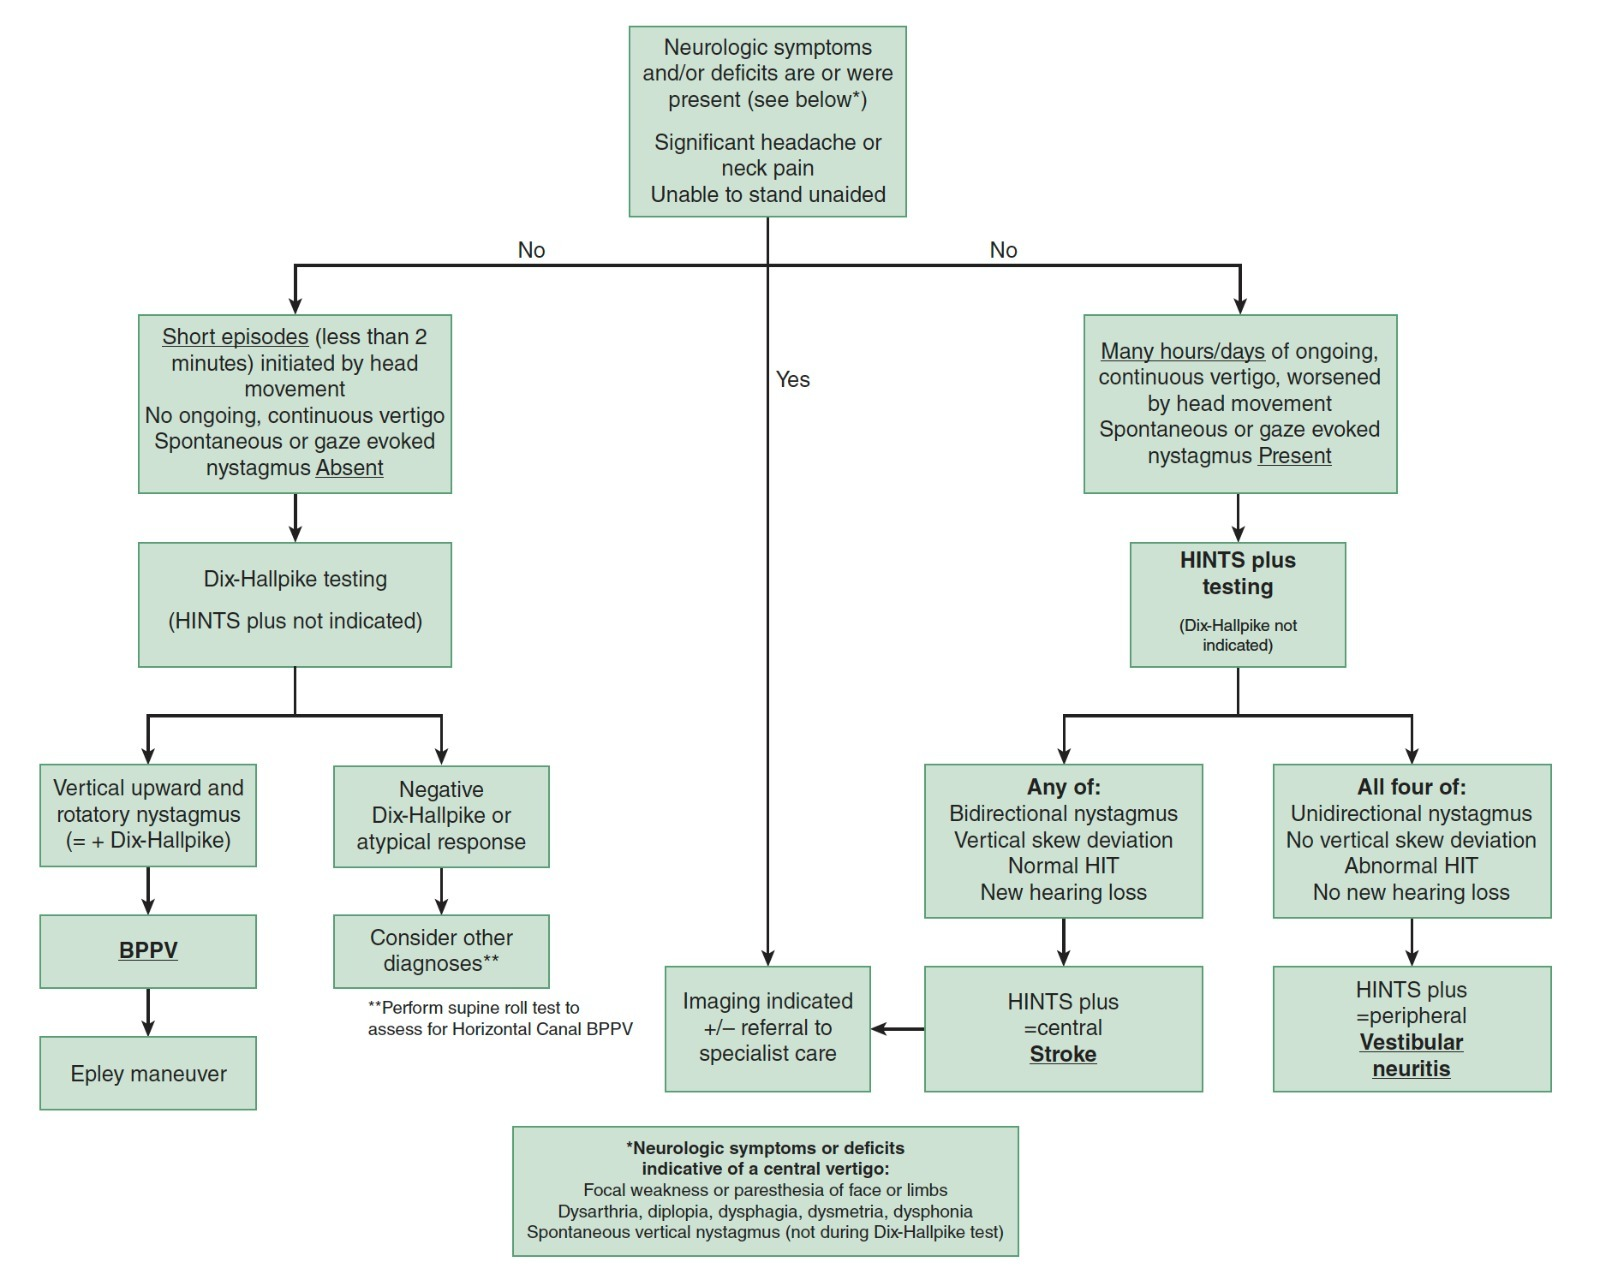 Source: Flow chart of the initial approach to the diagnosis of acute vertigo. From Tintinalli's Emergency Medicine: AComprehensive Study Guide (9th ed., p. 1148), by Judith E. Tintinalli, 2019, McGraw Hill. Reprinted with permission